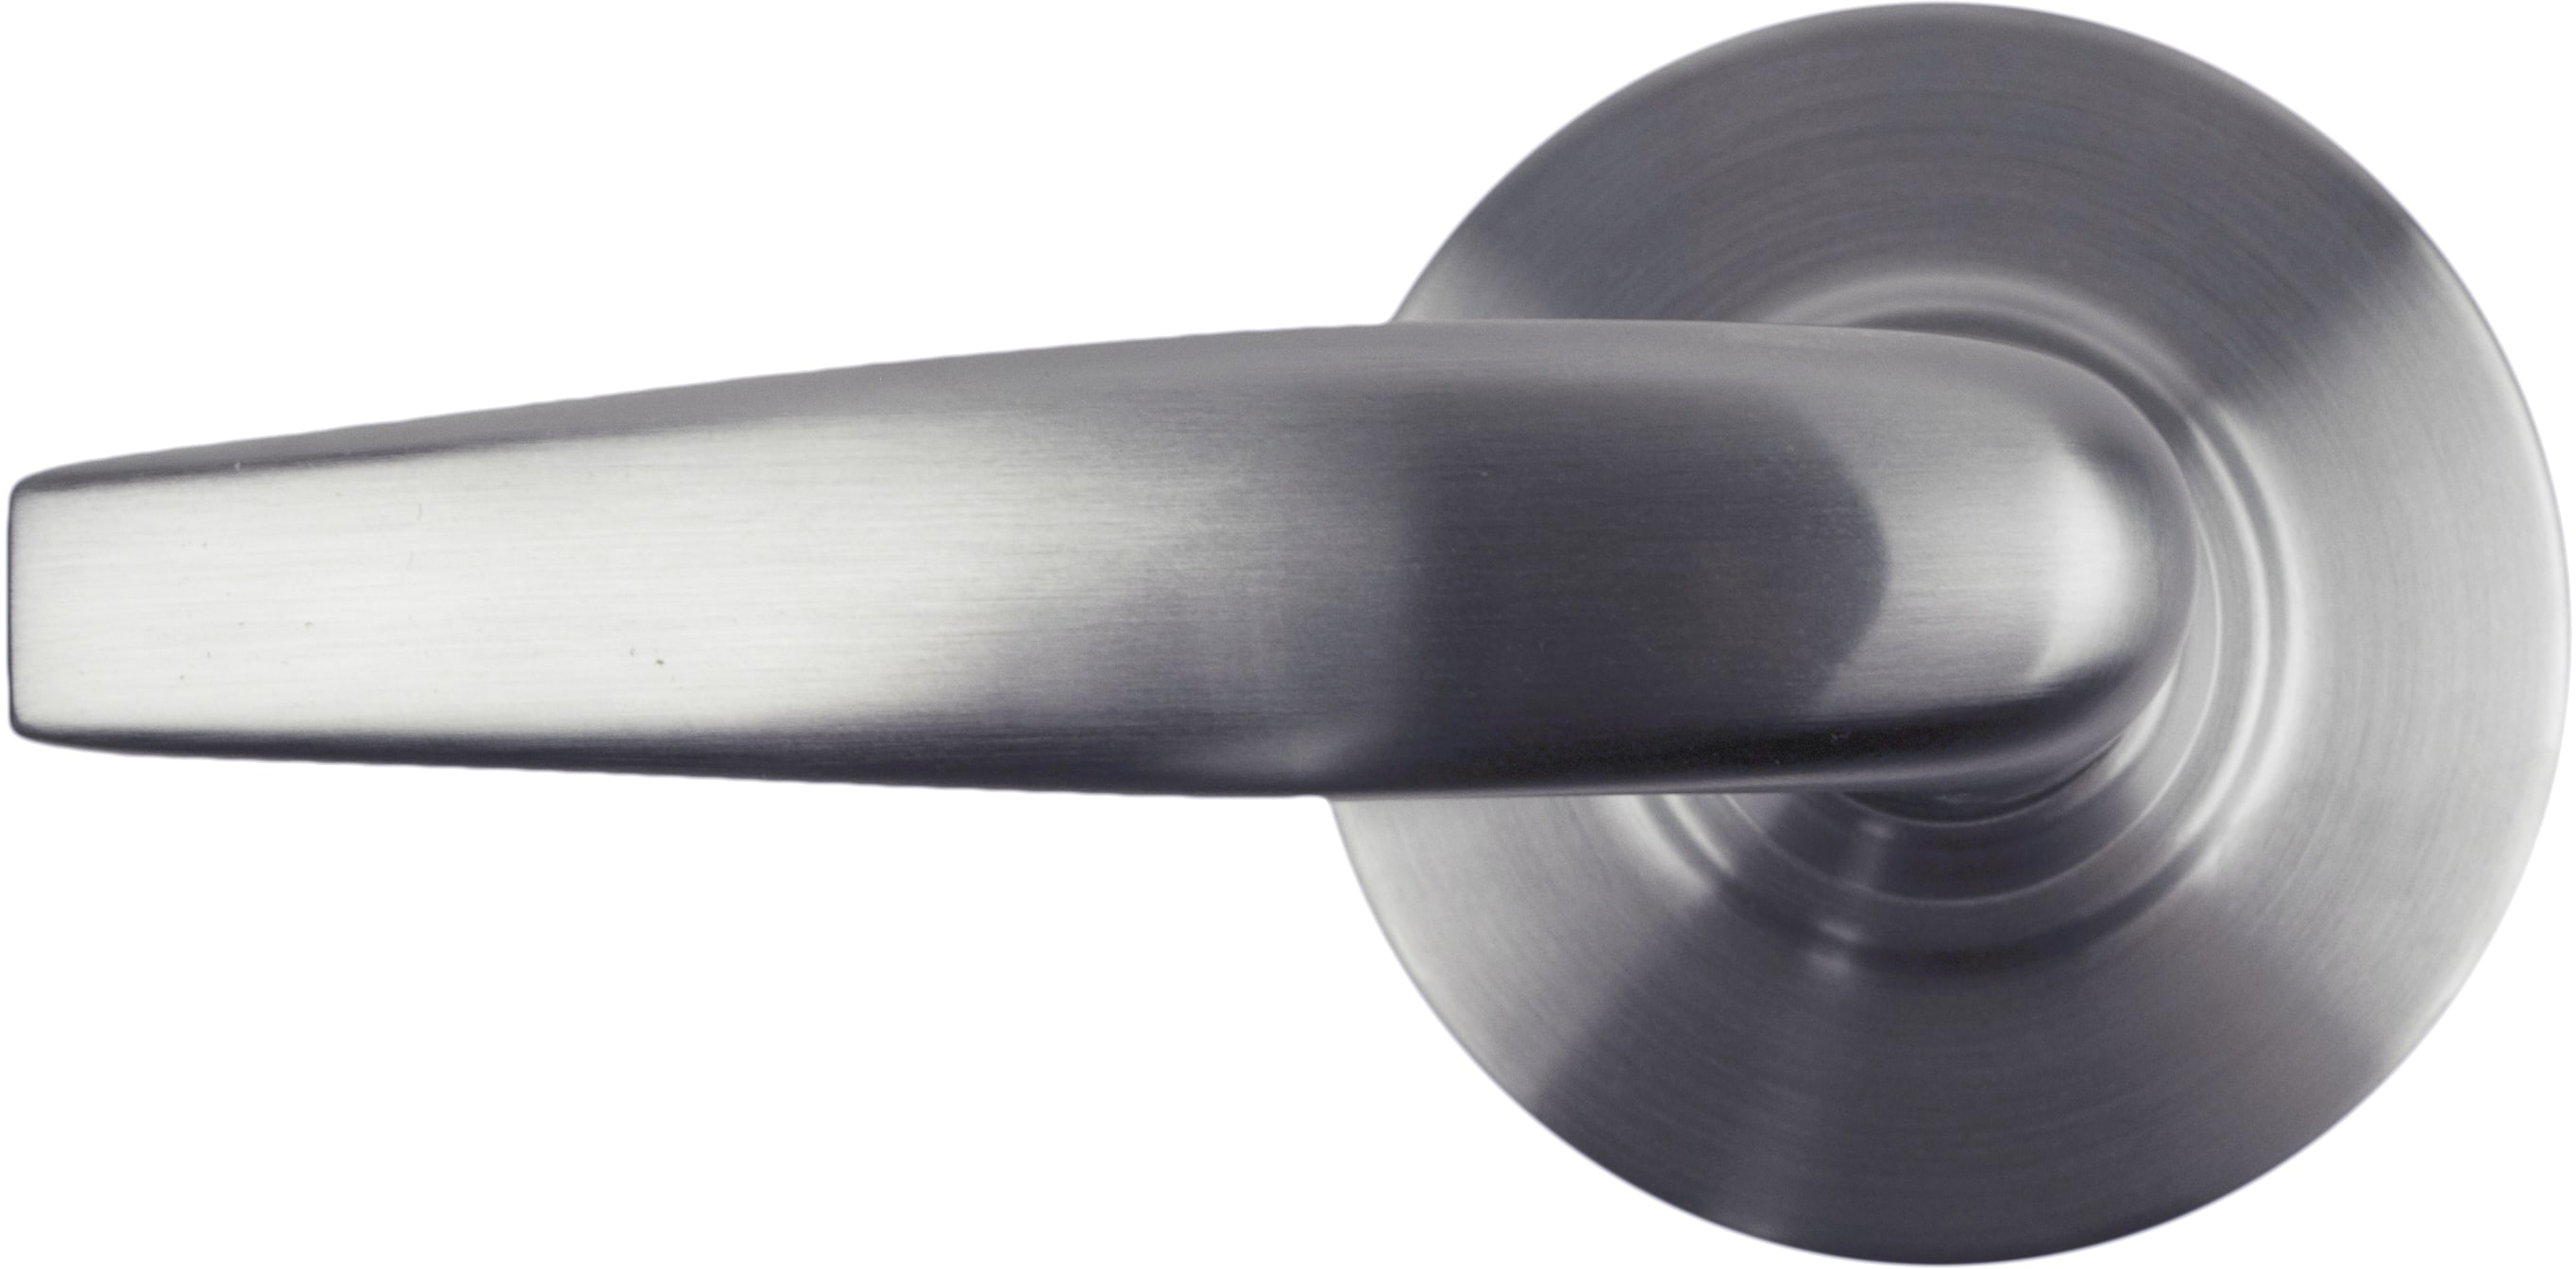 Olympic Stainless Steel Hall/Closet Door Lever